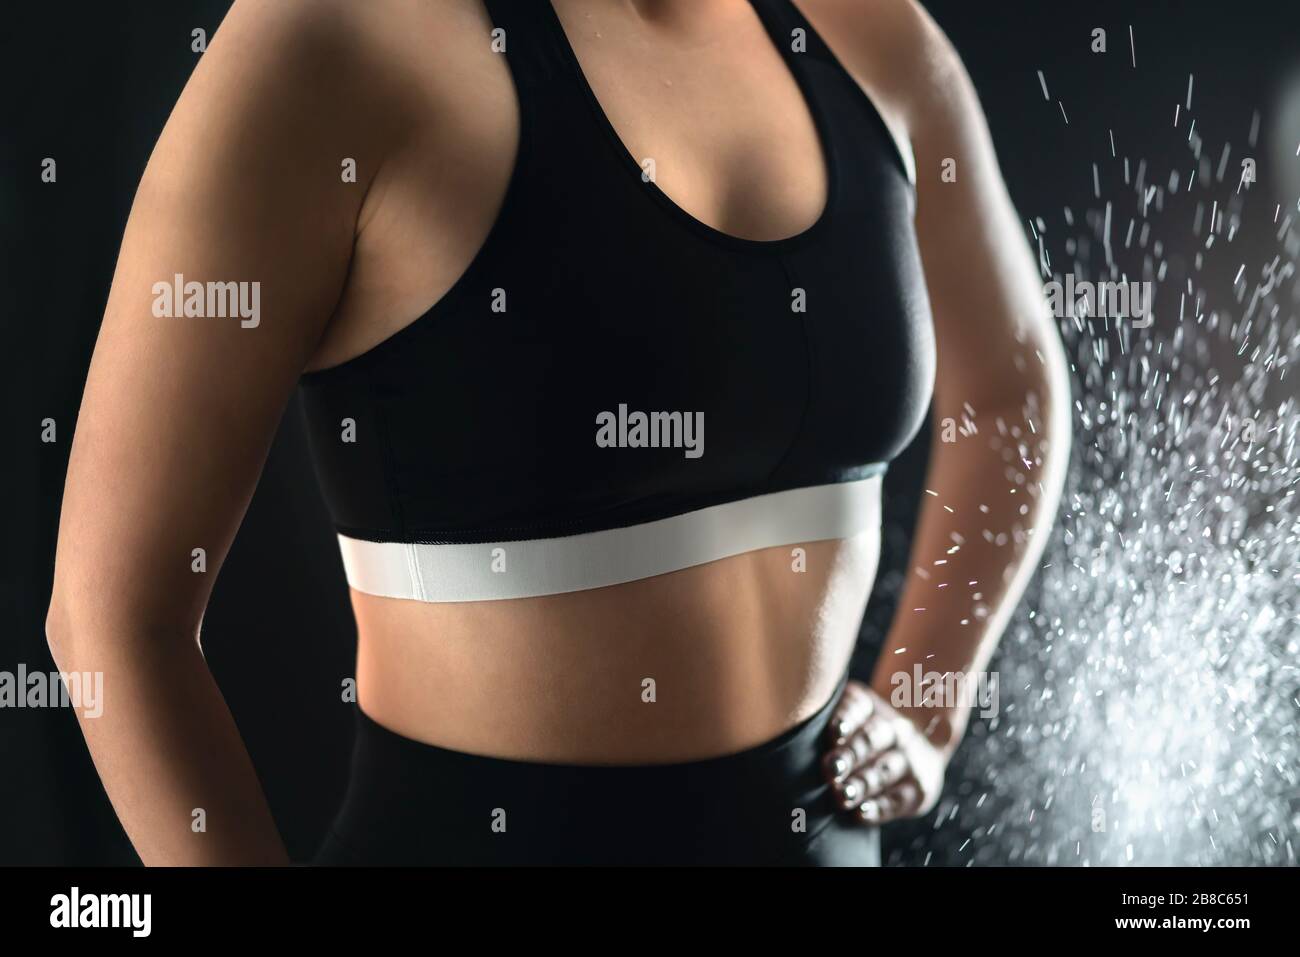 Fit woman in workout clothes. Weightlifting, gym training and fitness concept. Confident lady in sportswear and sports bra. Strong female weightlifter. Stock Photo